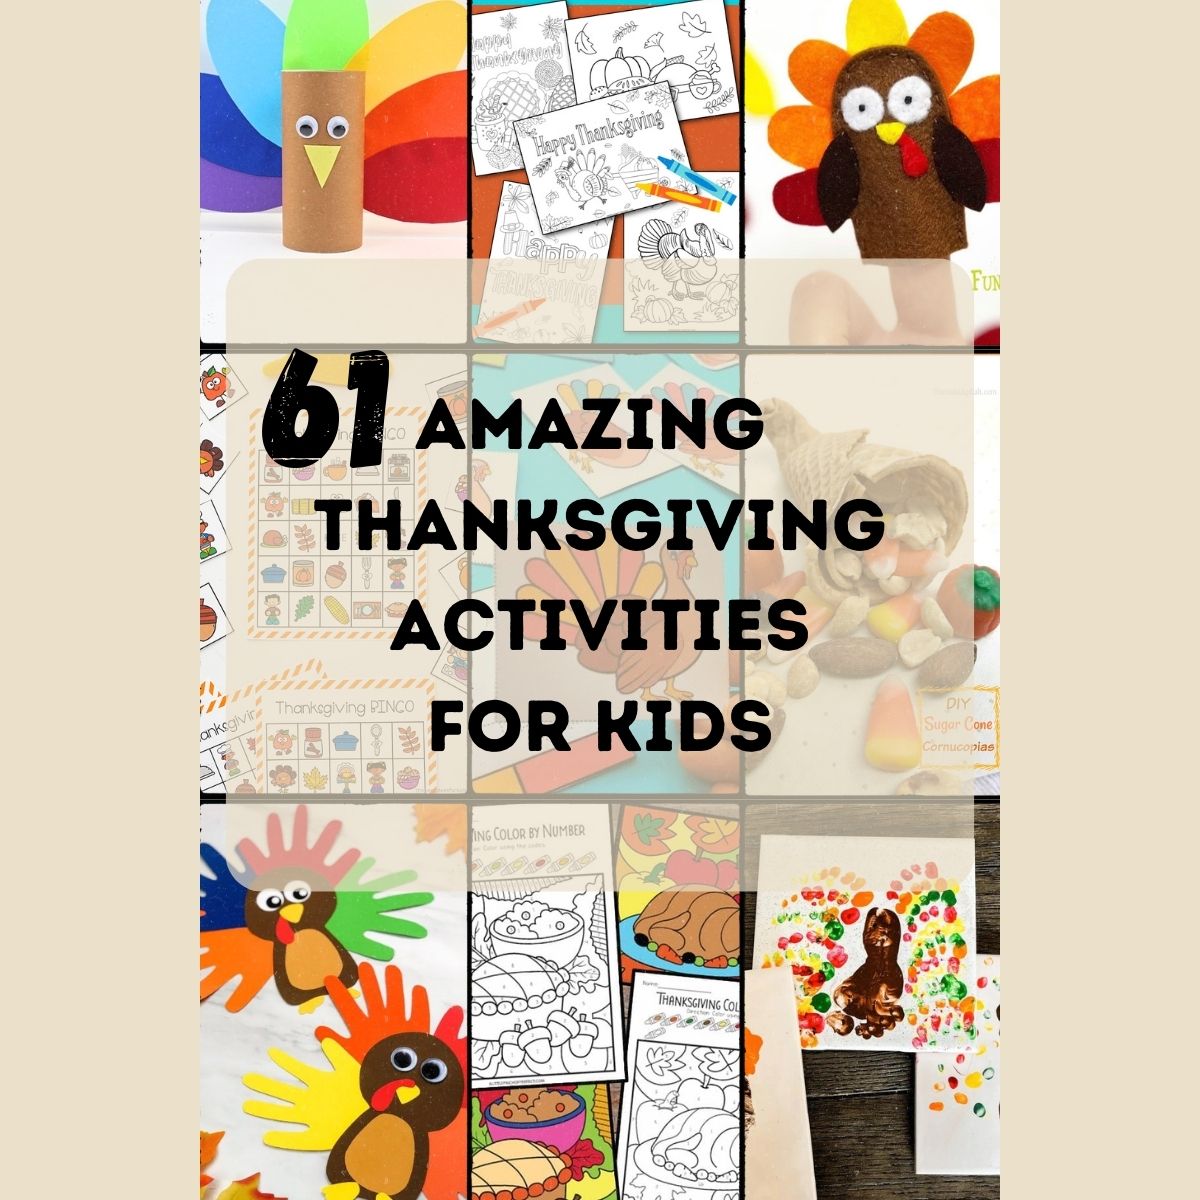 6 different thanksgiving crafts with words 61 Amazing Thanksgiving Activities for Kids